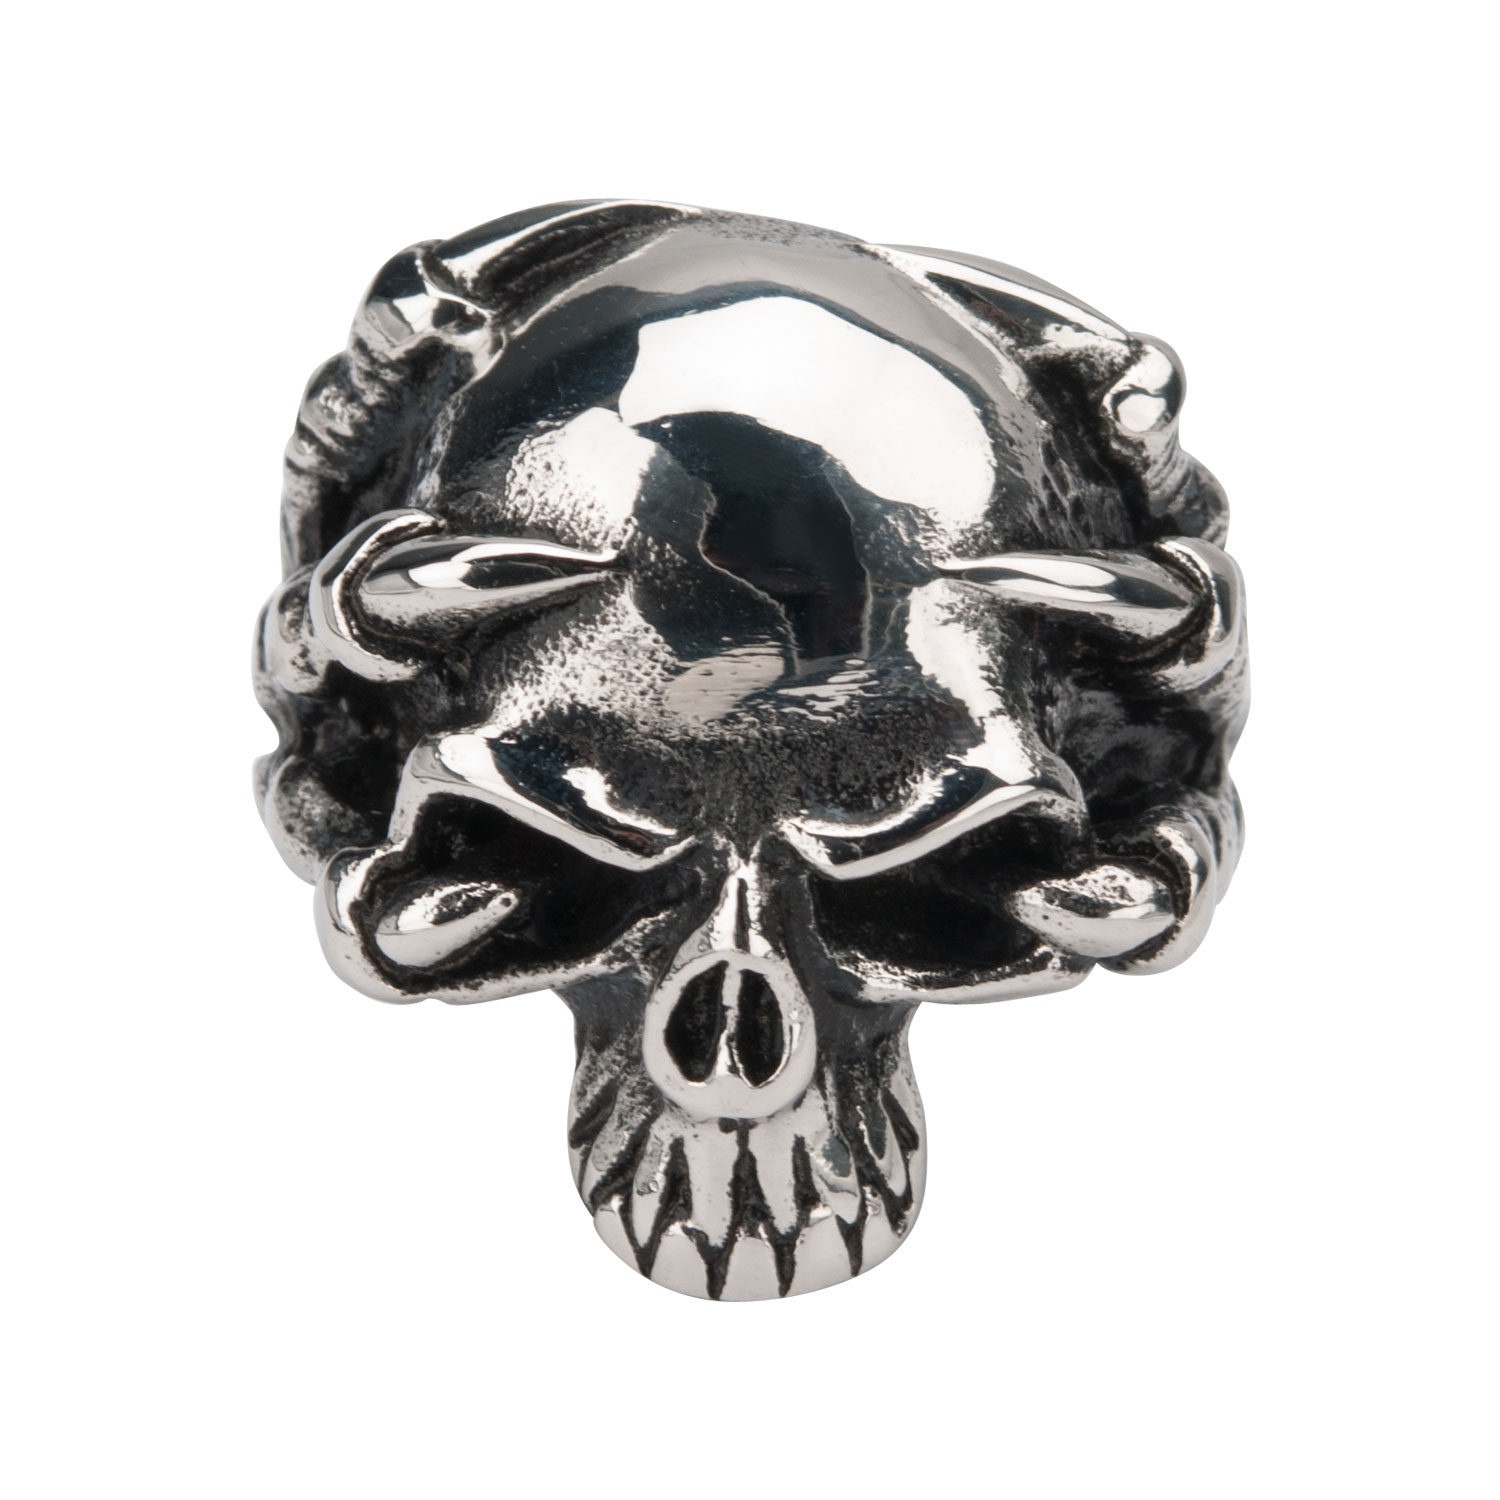 Black Oxidized Skull Ring with Claws Image 2 Midtown Diamonds Reno, NV